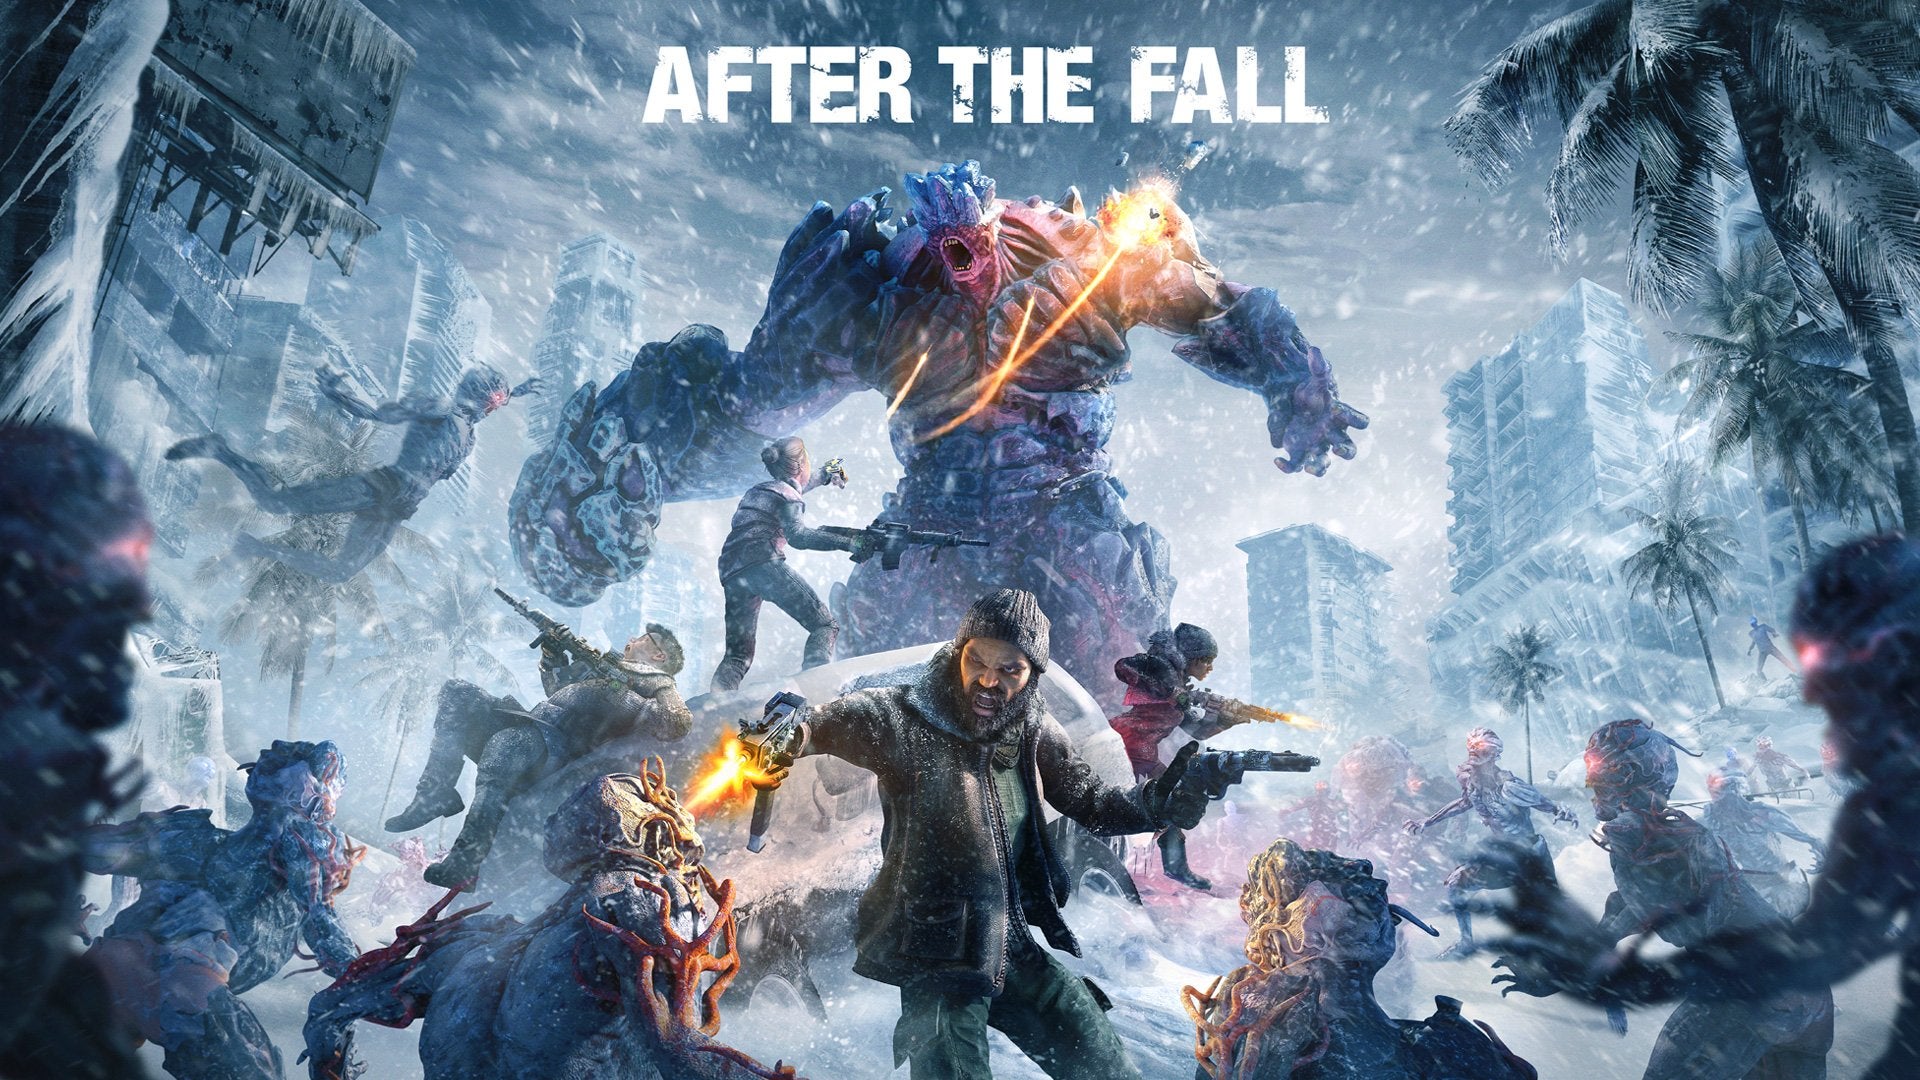 Image for Vertigo Games' After The Fall earned $1.4m in 24 hours